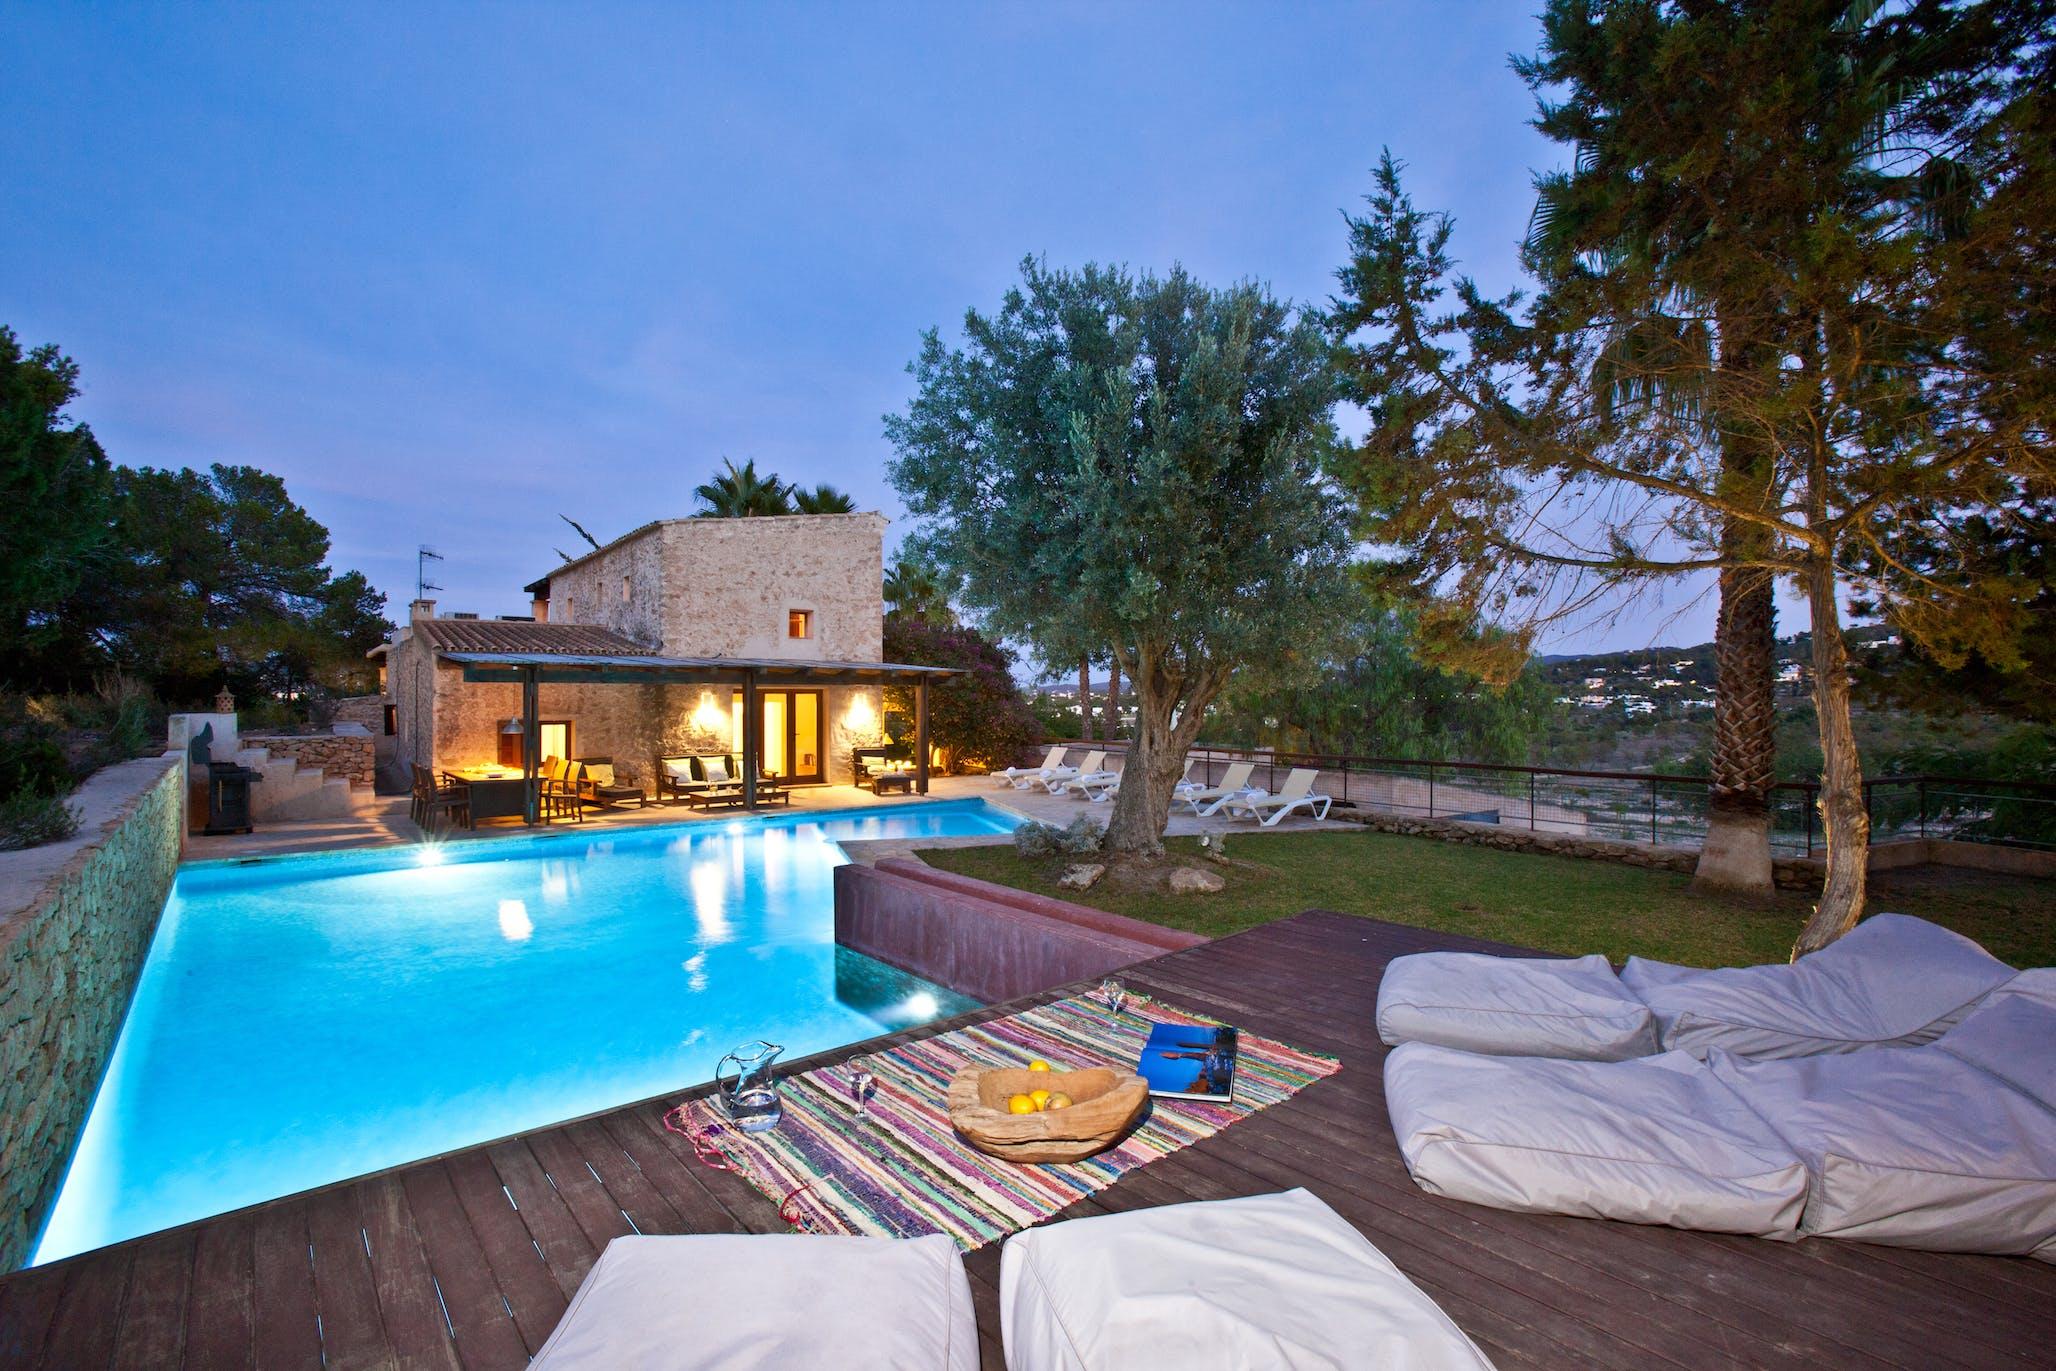 You are currently viewing Can Cala Bassa – ‘Beautifully constructed with tradition.’